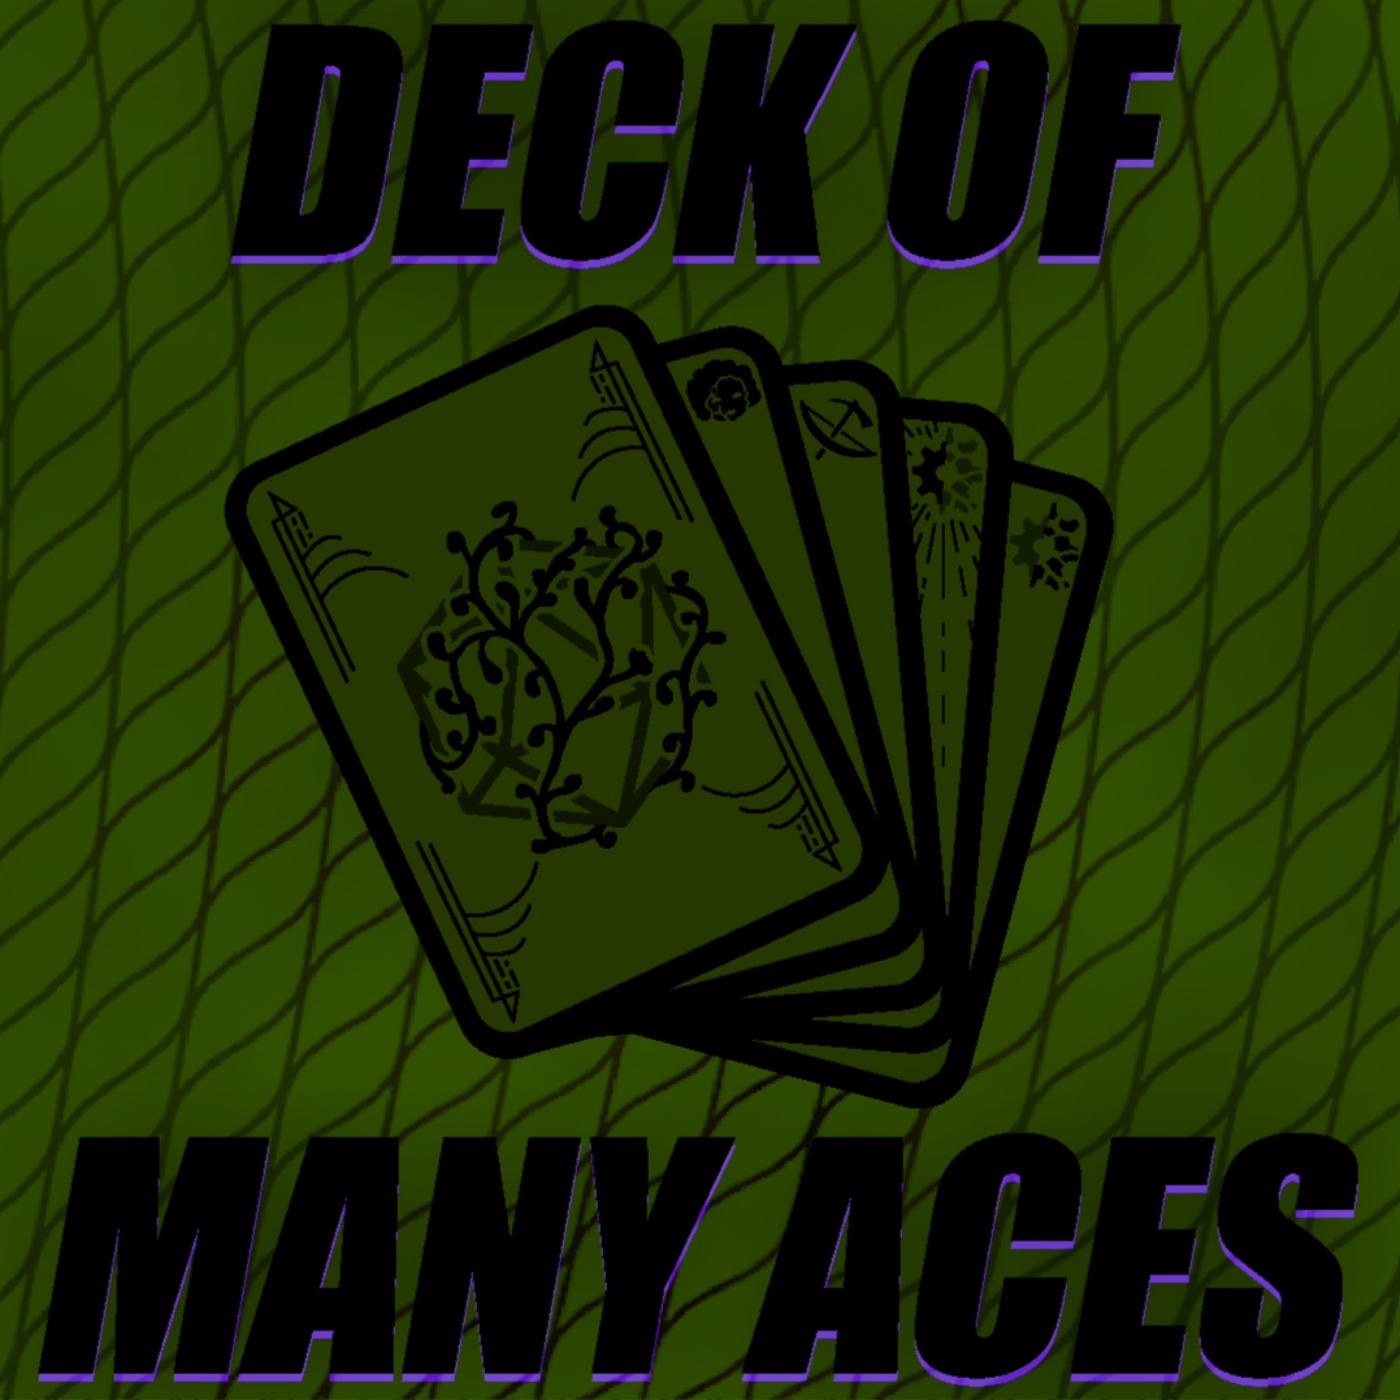 Splitting the Deck - Who You Gonna Call?